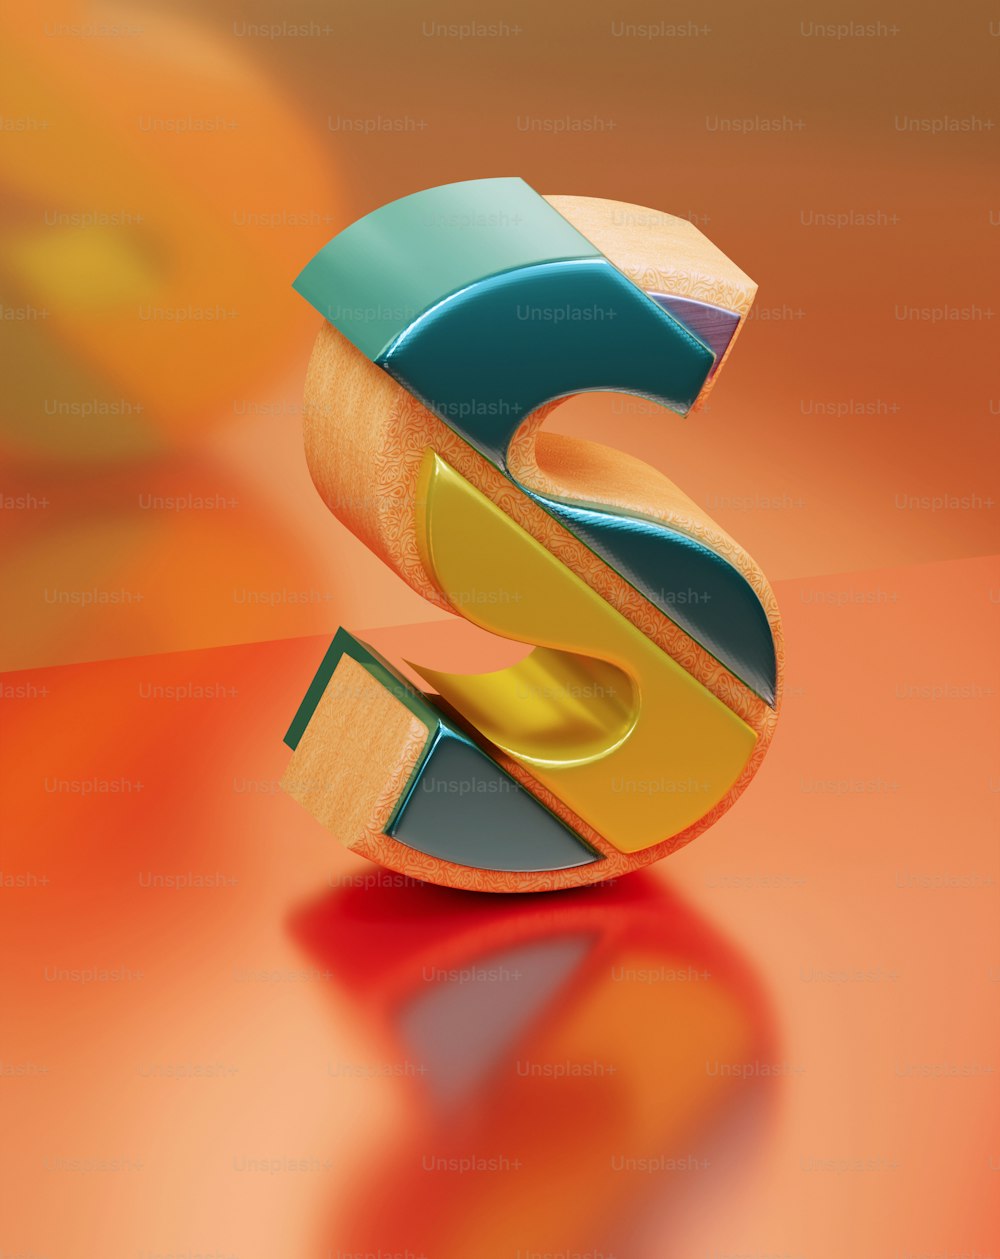 a 3d image of the letter s on a table photo – Digital image Image on  Unsplash